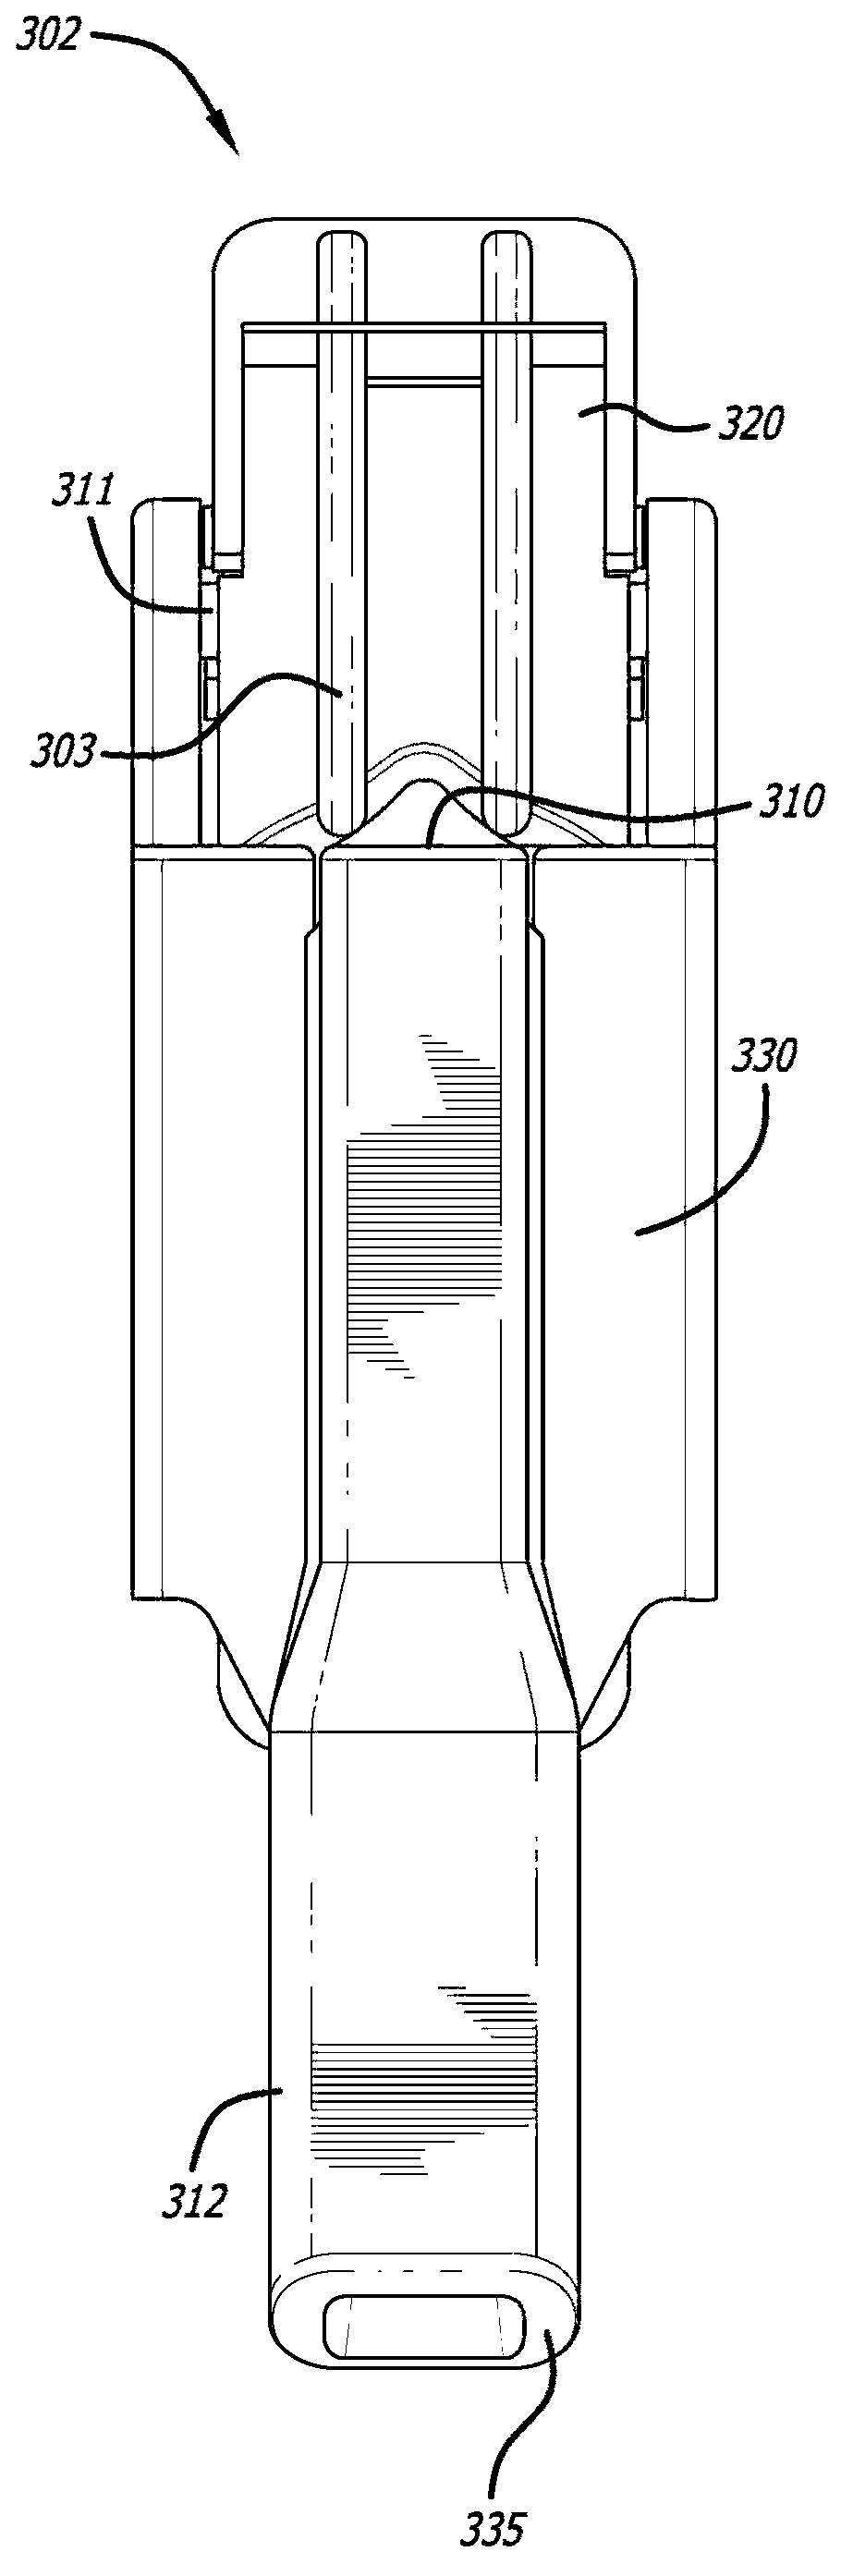 Dry powder drug delivery system and methods